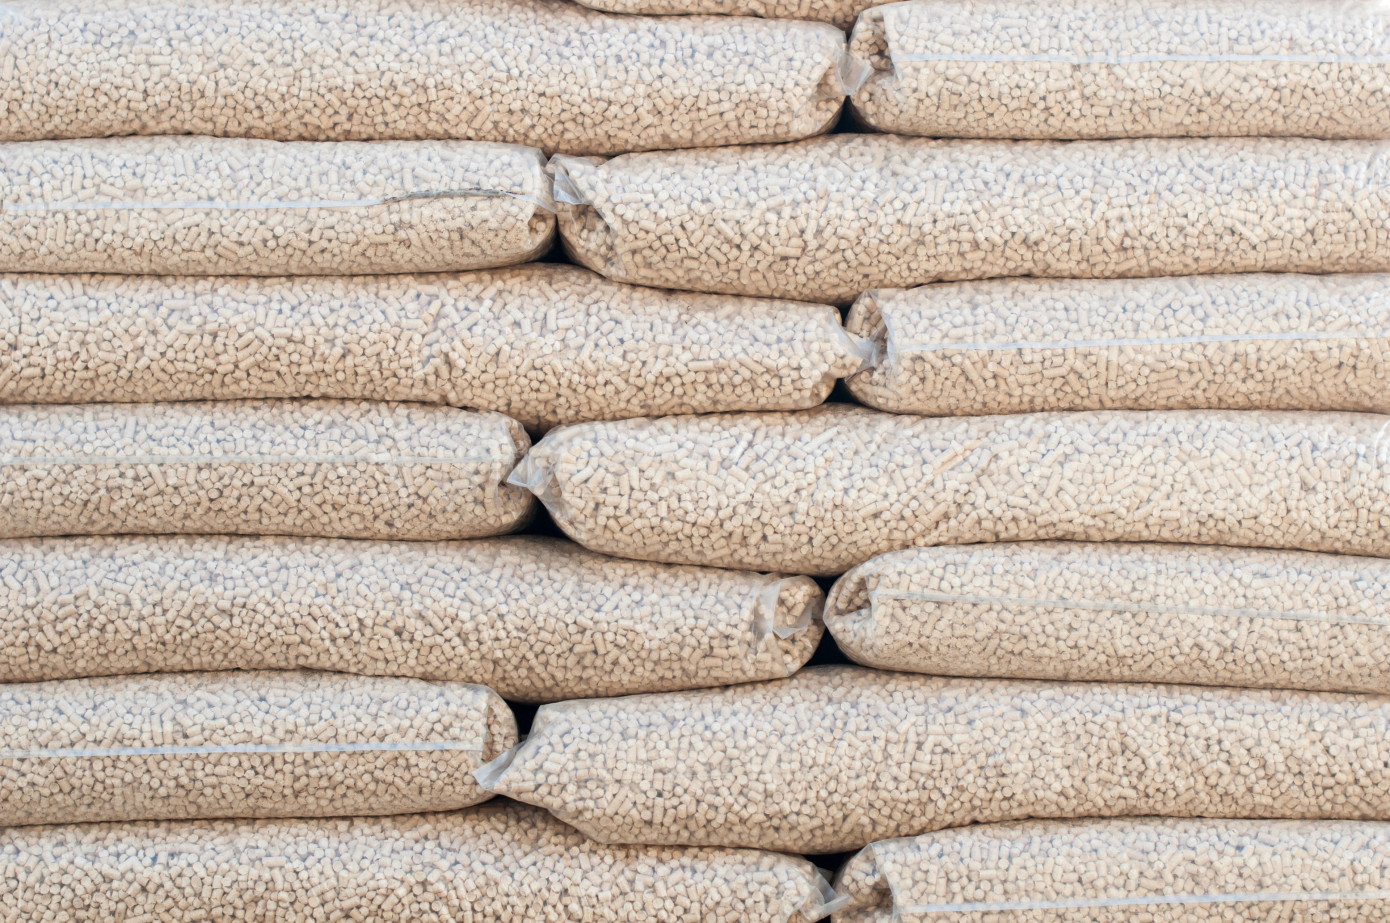 South Korea’s wood pellet imports fall 10% in Q1